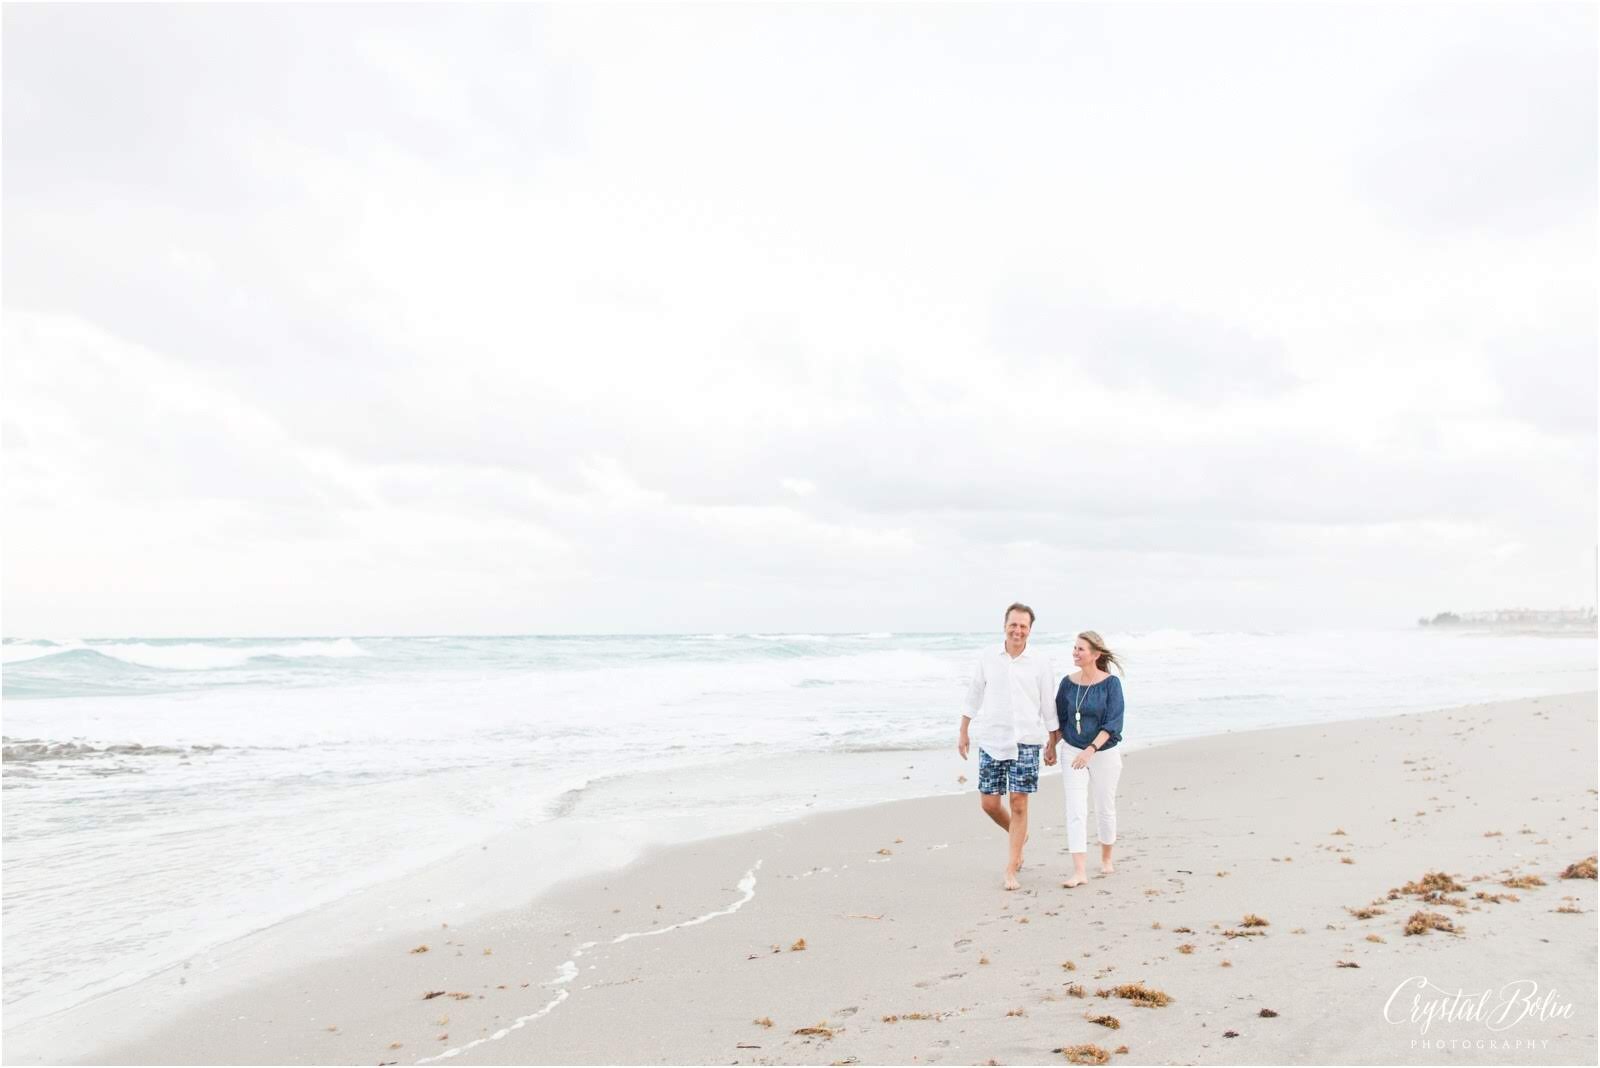 Gier Family Vacation Portraits on Singer Island, Florida